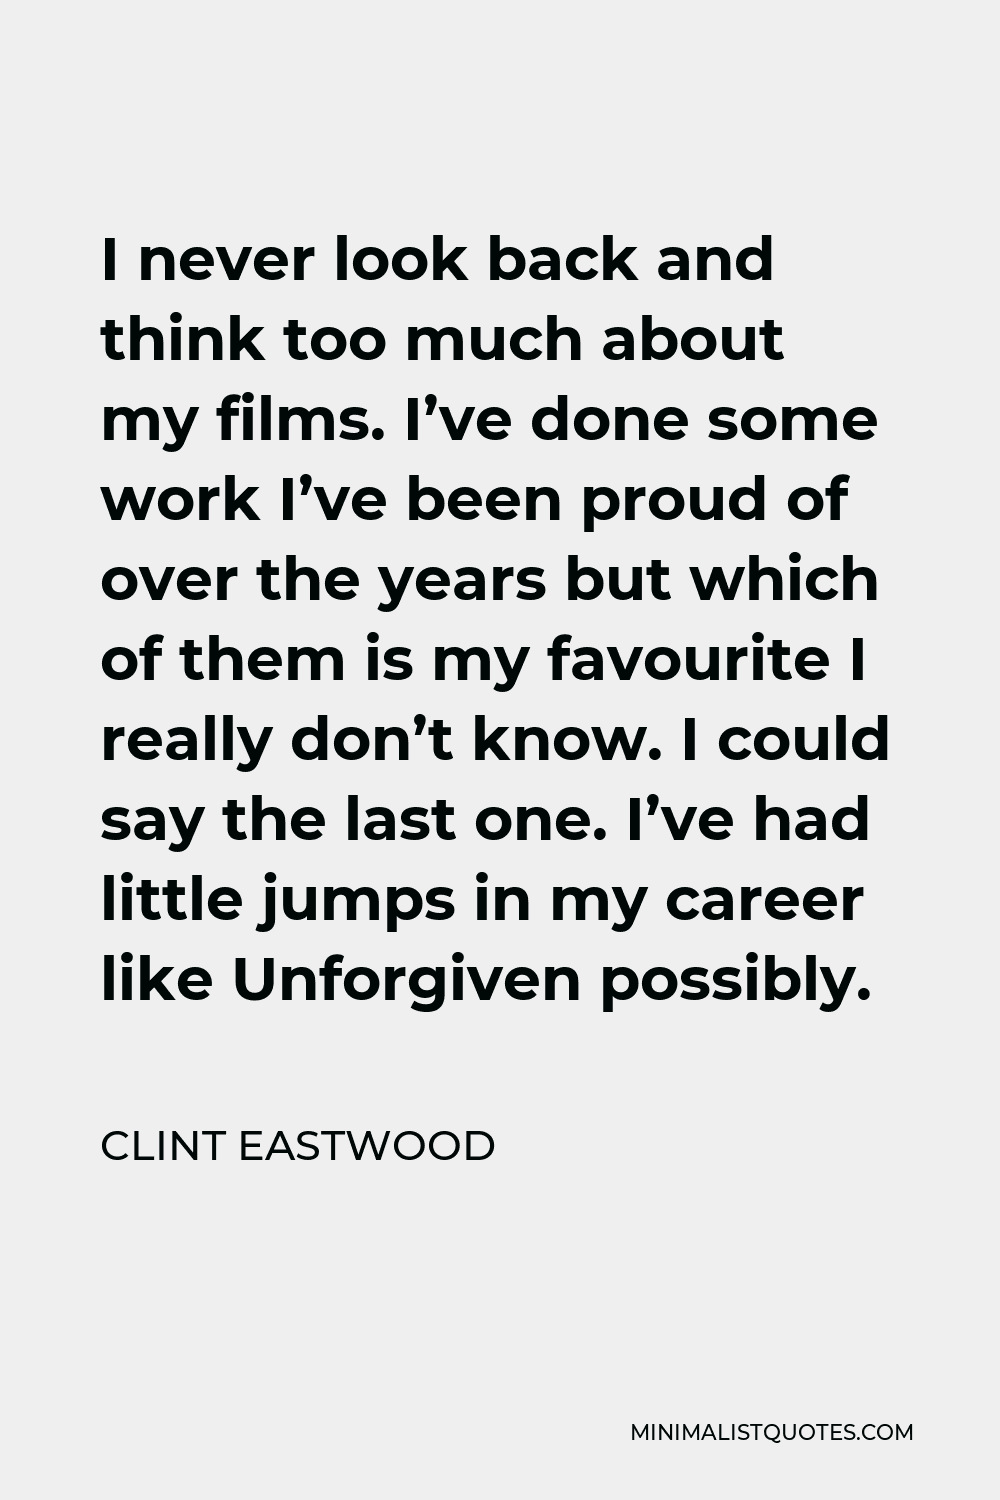 Clint Eastwood Quote - I never look back and think too much about my films. I’ve done some work I’ve been proud of over the years but which of them is my favourite I really don’t know. I could say the last one. I’ve had little jumps in my career like Unforgiven possibly.